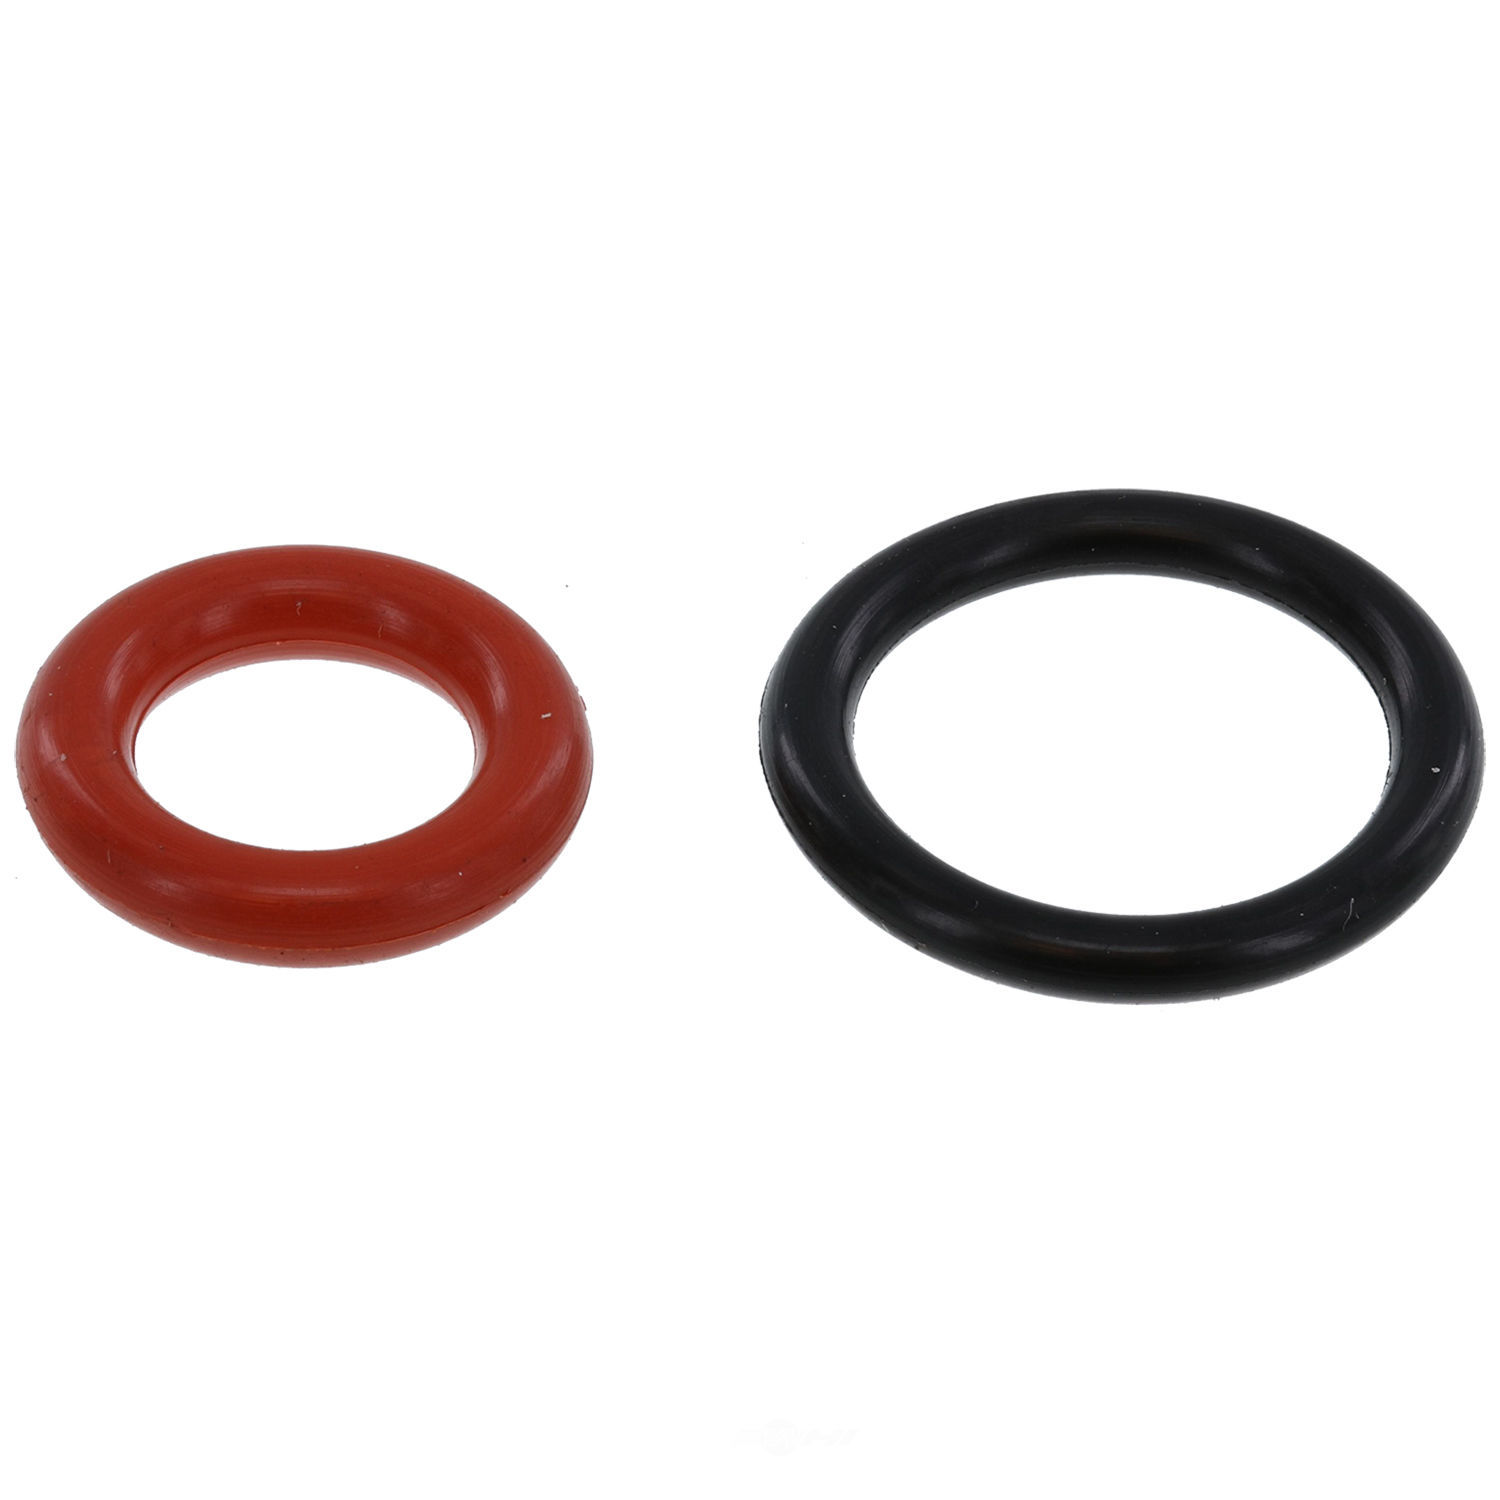 GB REMANUFACTURING INC. - Fuel Injector Seal Kit - GBR 8-076